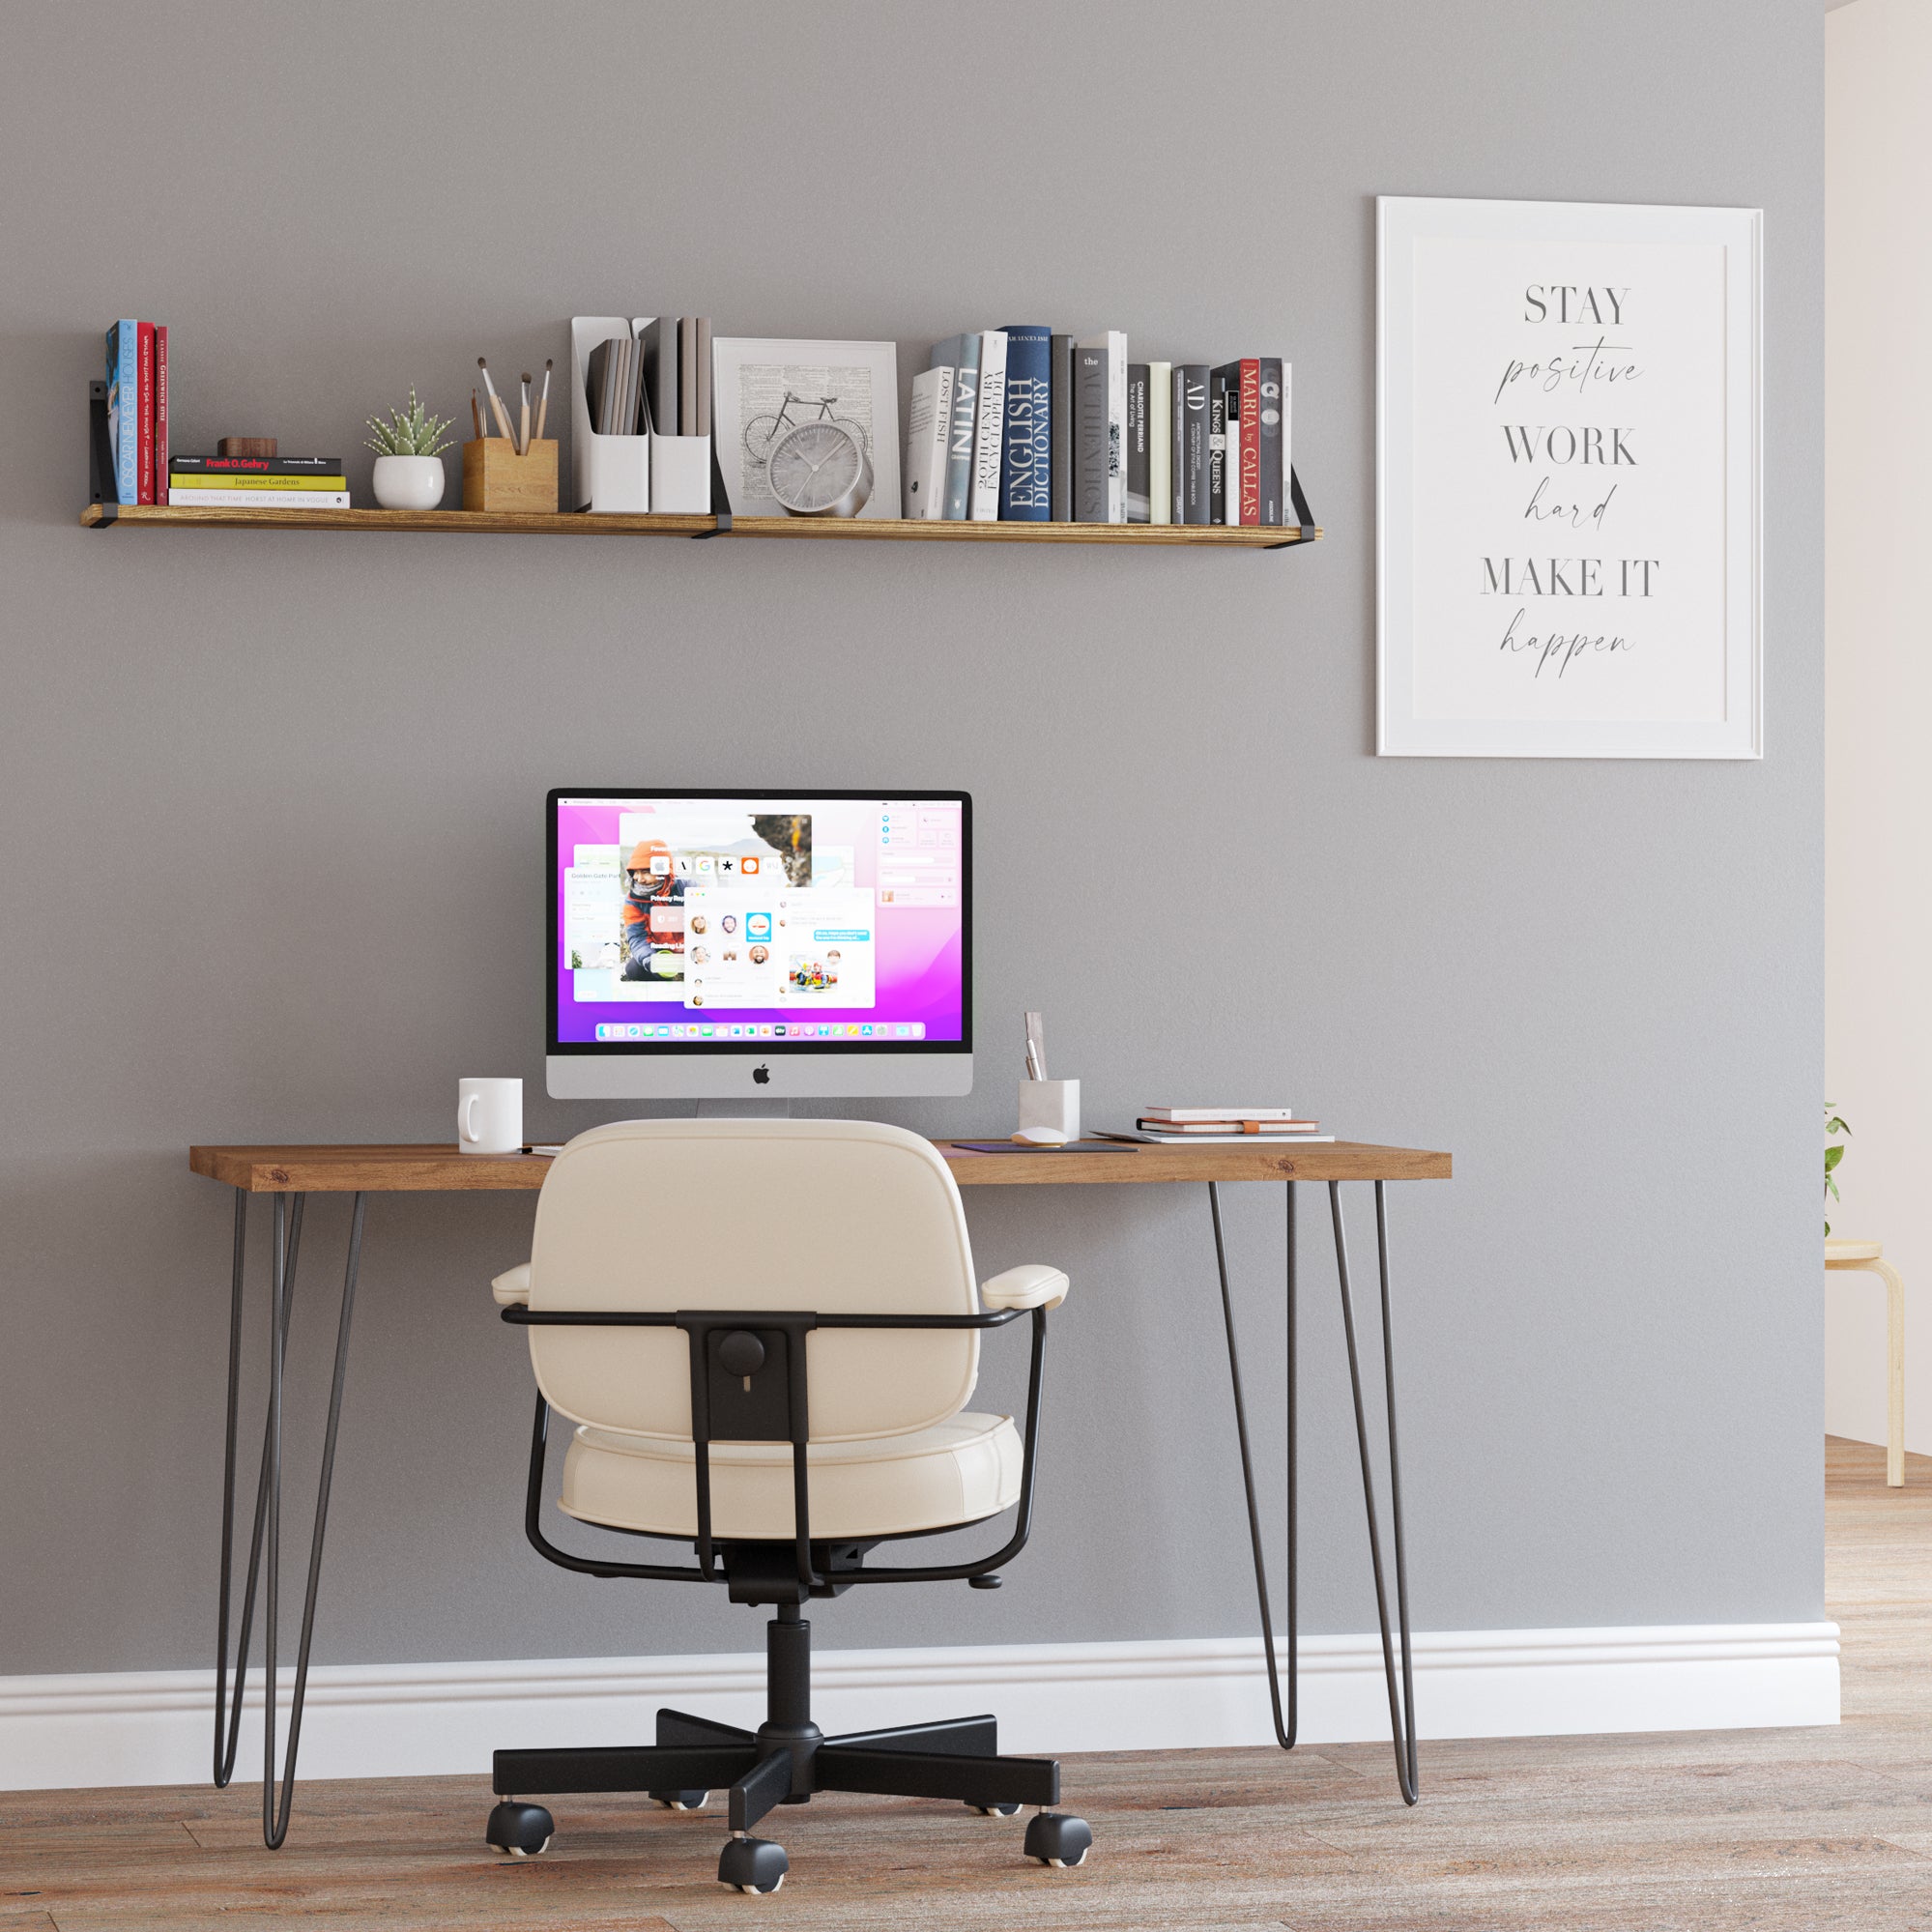 Against a gray wall is a wooden desk holding an all-in-one computer, with a mug and some notes on the side. Above the desk, there's a wall book shelf filled with books, organizers, and a small plant, contributing to a functional and stylish look. To the right on the wall, there's an inspirational framed poster with the text "STAY positive WORK hard MAKE IT happen."